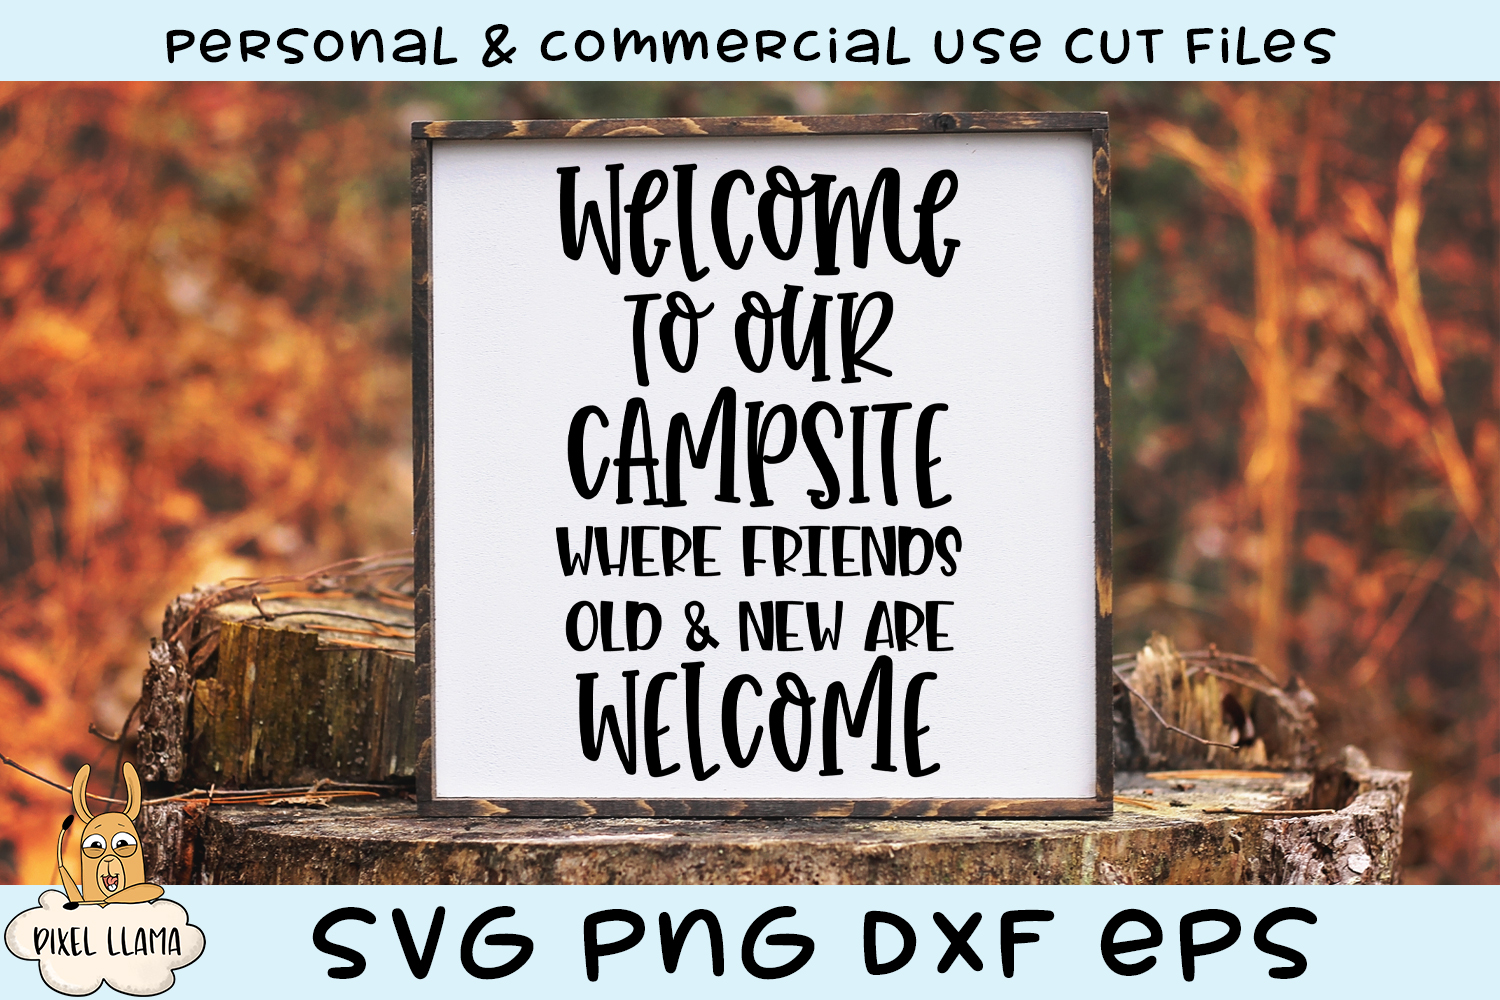 Welcome To Our Campsite Friends Old & New Are Welcome SVG